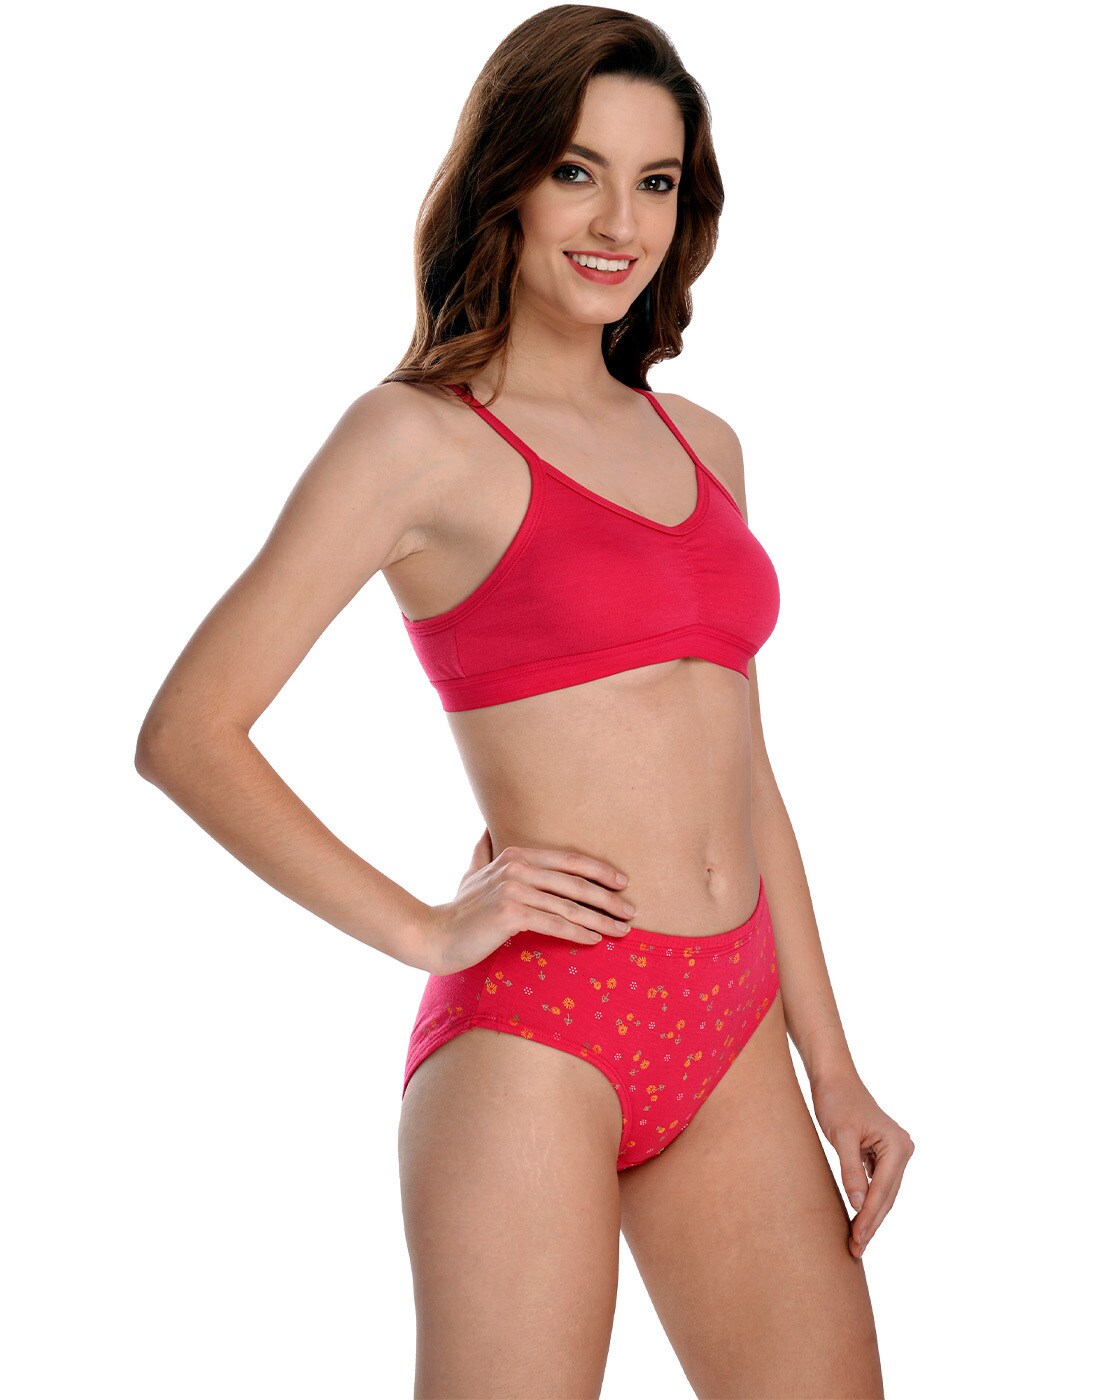 Sexy Lingerie Set Women Lace Three Quarters Adjusted-straps Bra And See- through Lace Panty at Rs 1056.43, Koramangala, Bengaluru